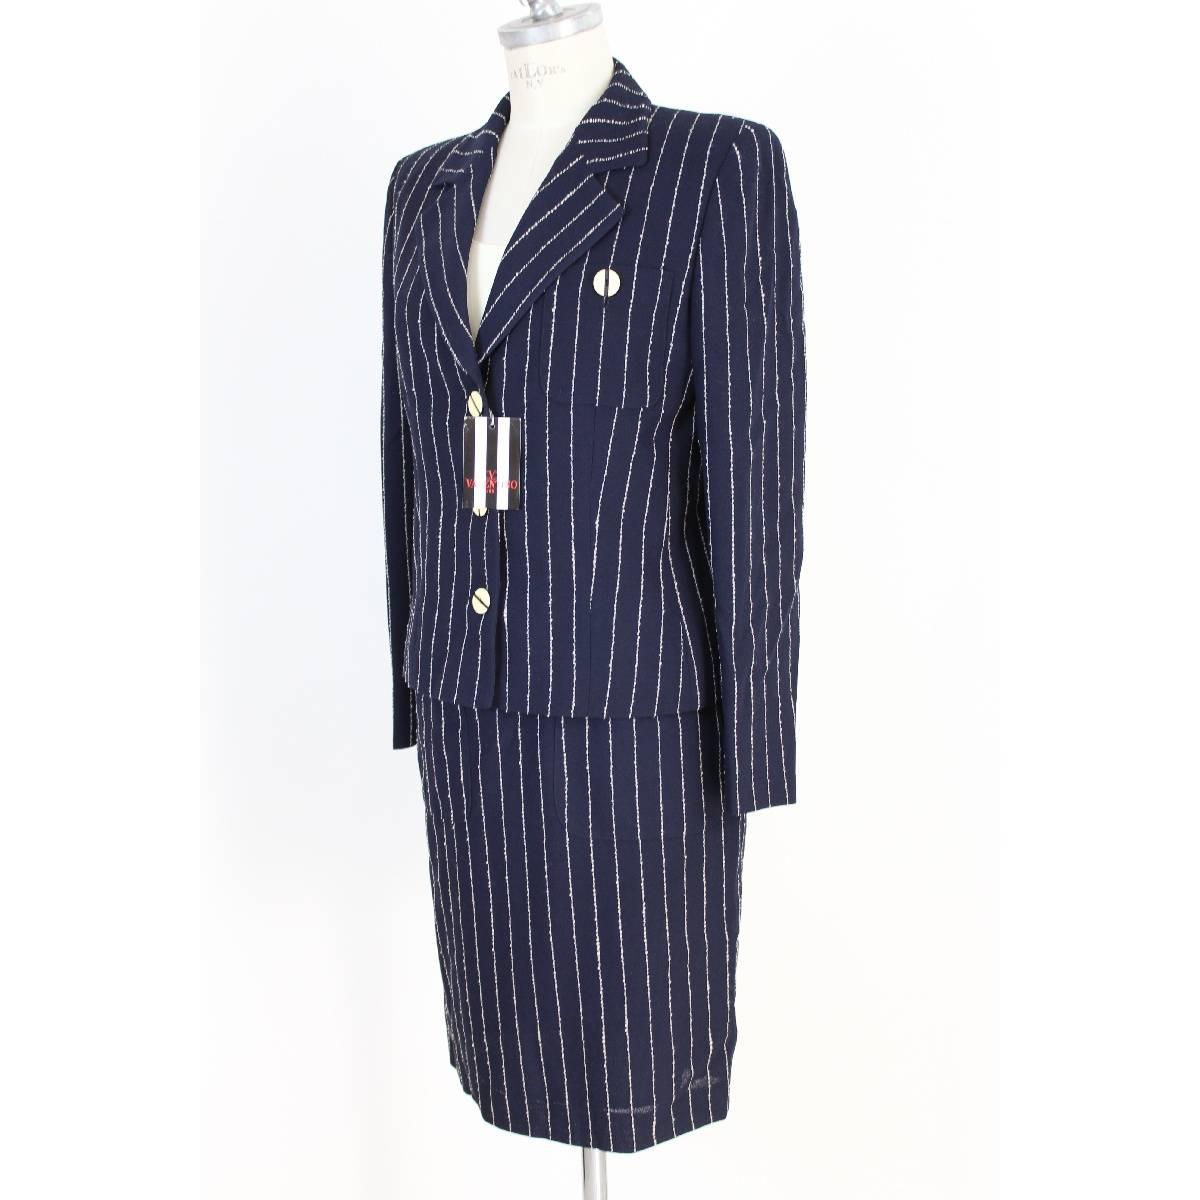 Valentino vintage pinstripe dress and jacket women’s. Beautiful set blue in wool. Size 42 it 8 Us. The dress is blue and ivory all lined. Made in Italy, new with label.

Size: 42 IT 8 US 10 UK

Shoulder: 42 cm
Bust / Chest: 50 cm
Sleeve: 60